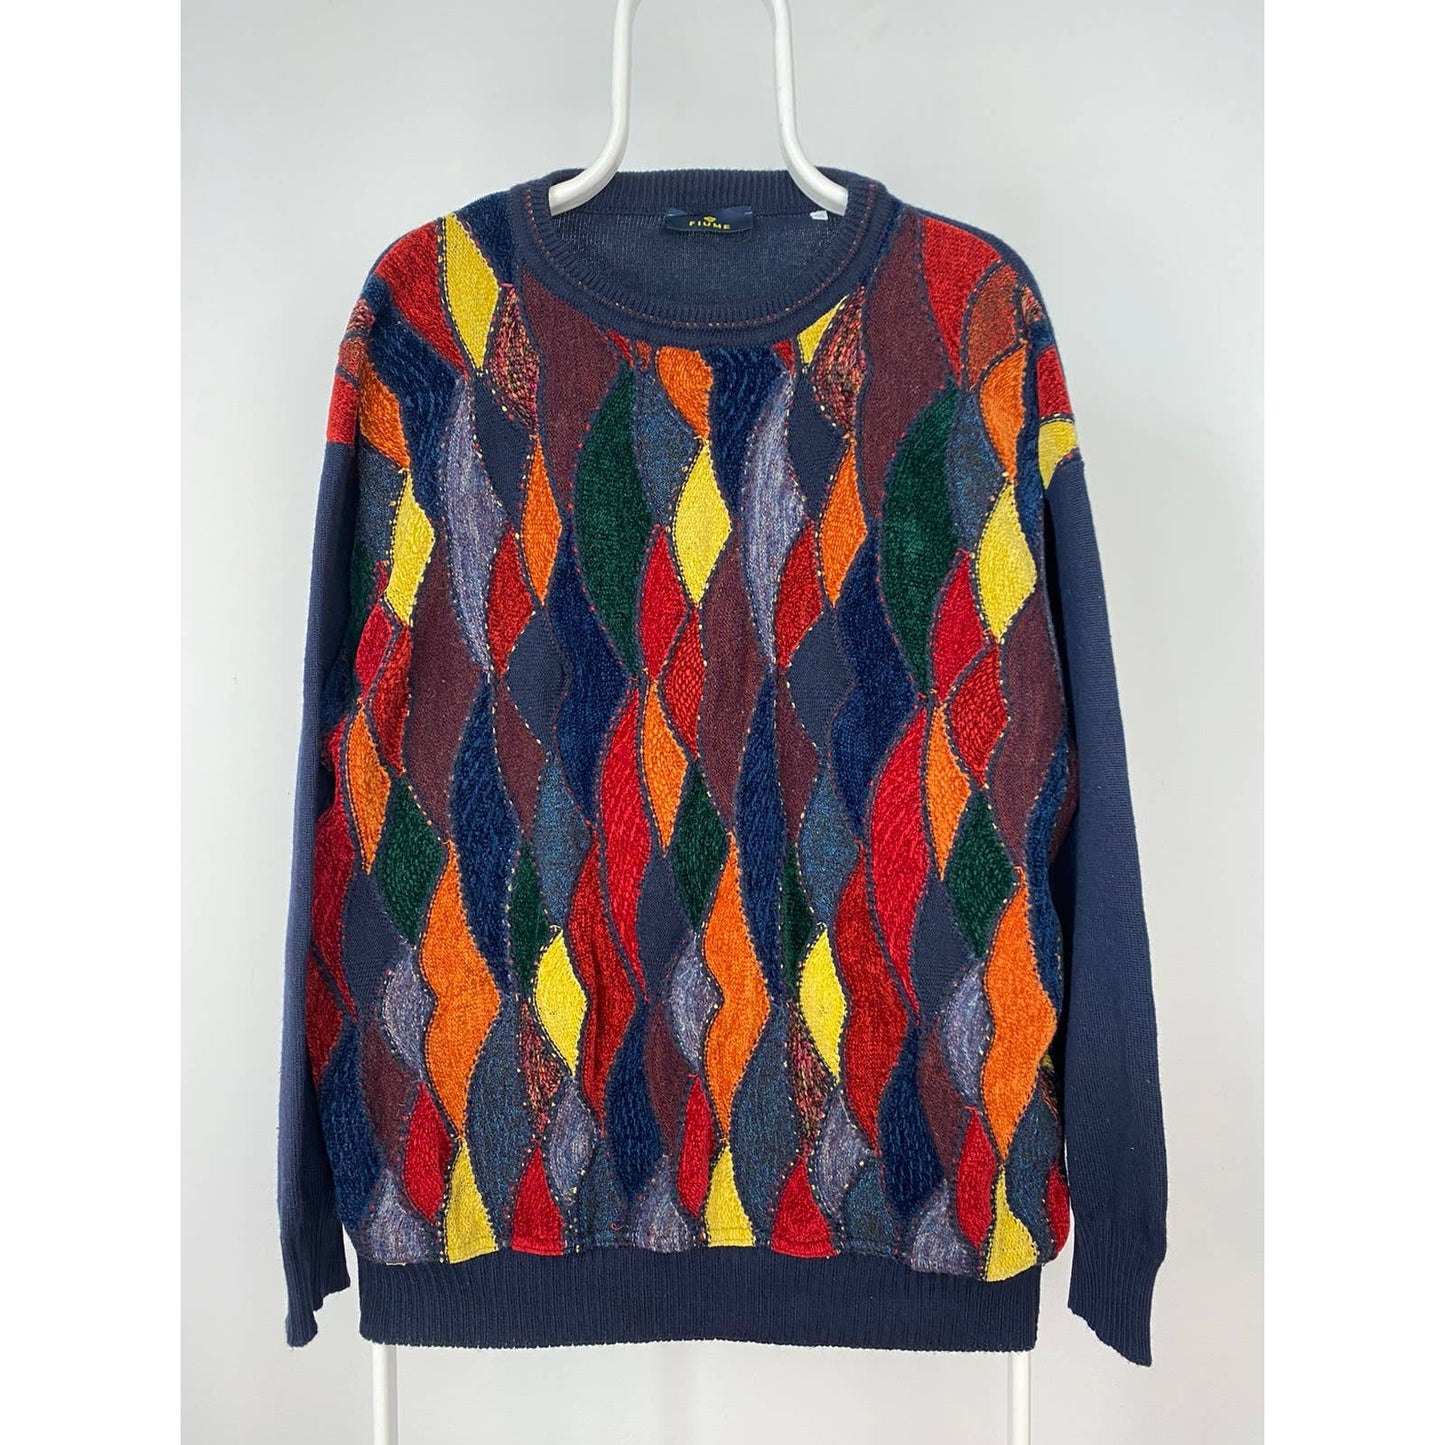 Fiume Vintage Coogi style sweater cable knit sweater